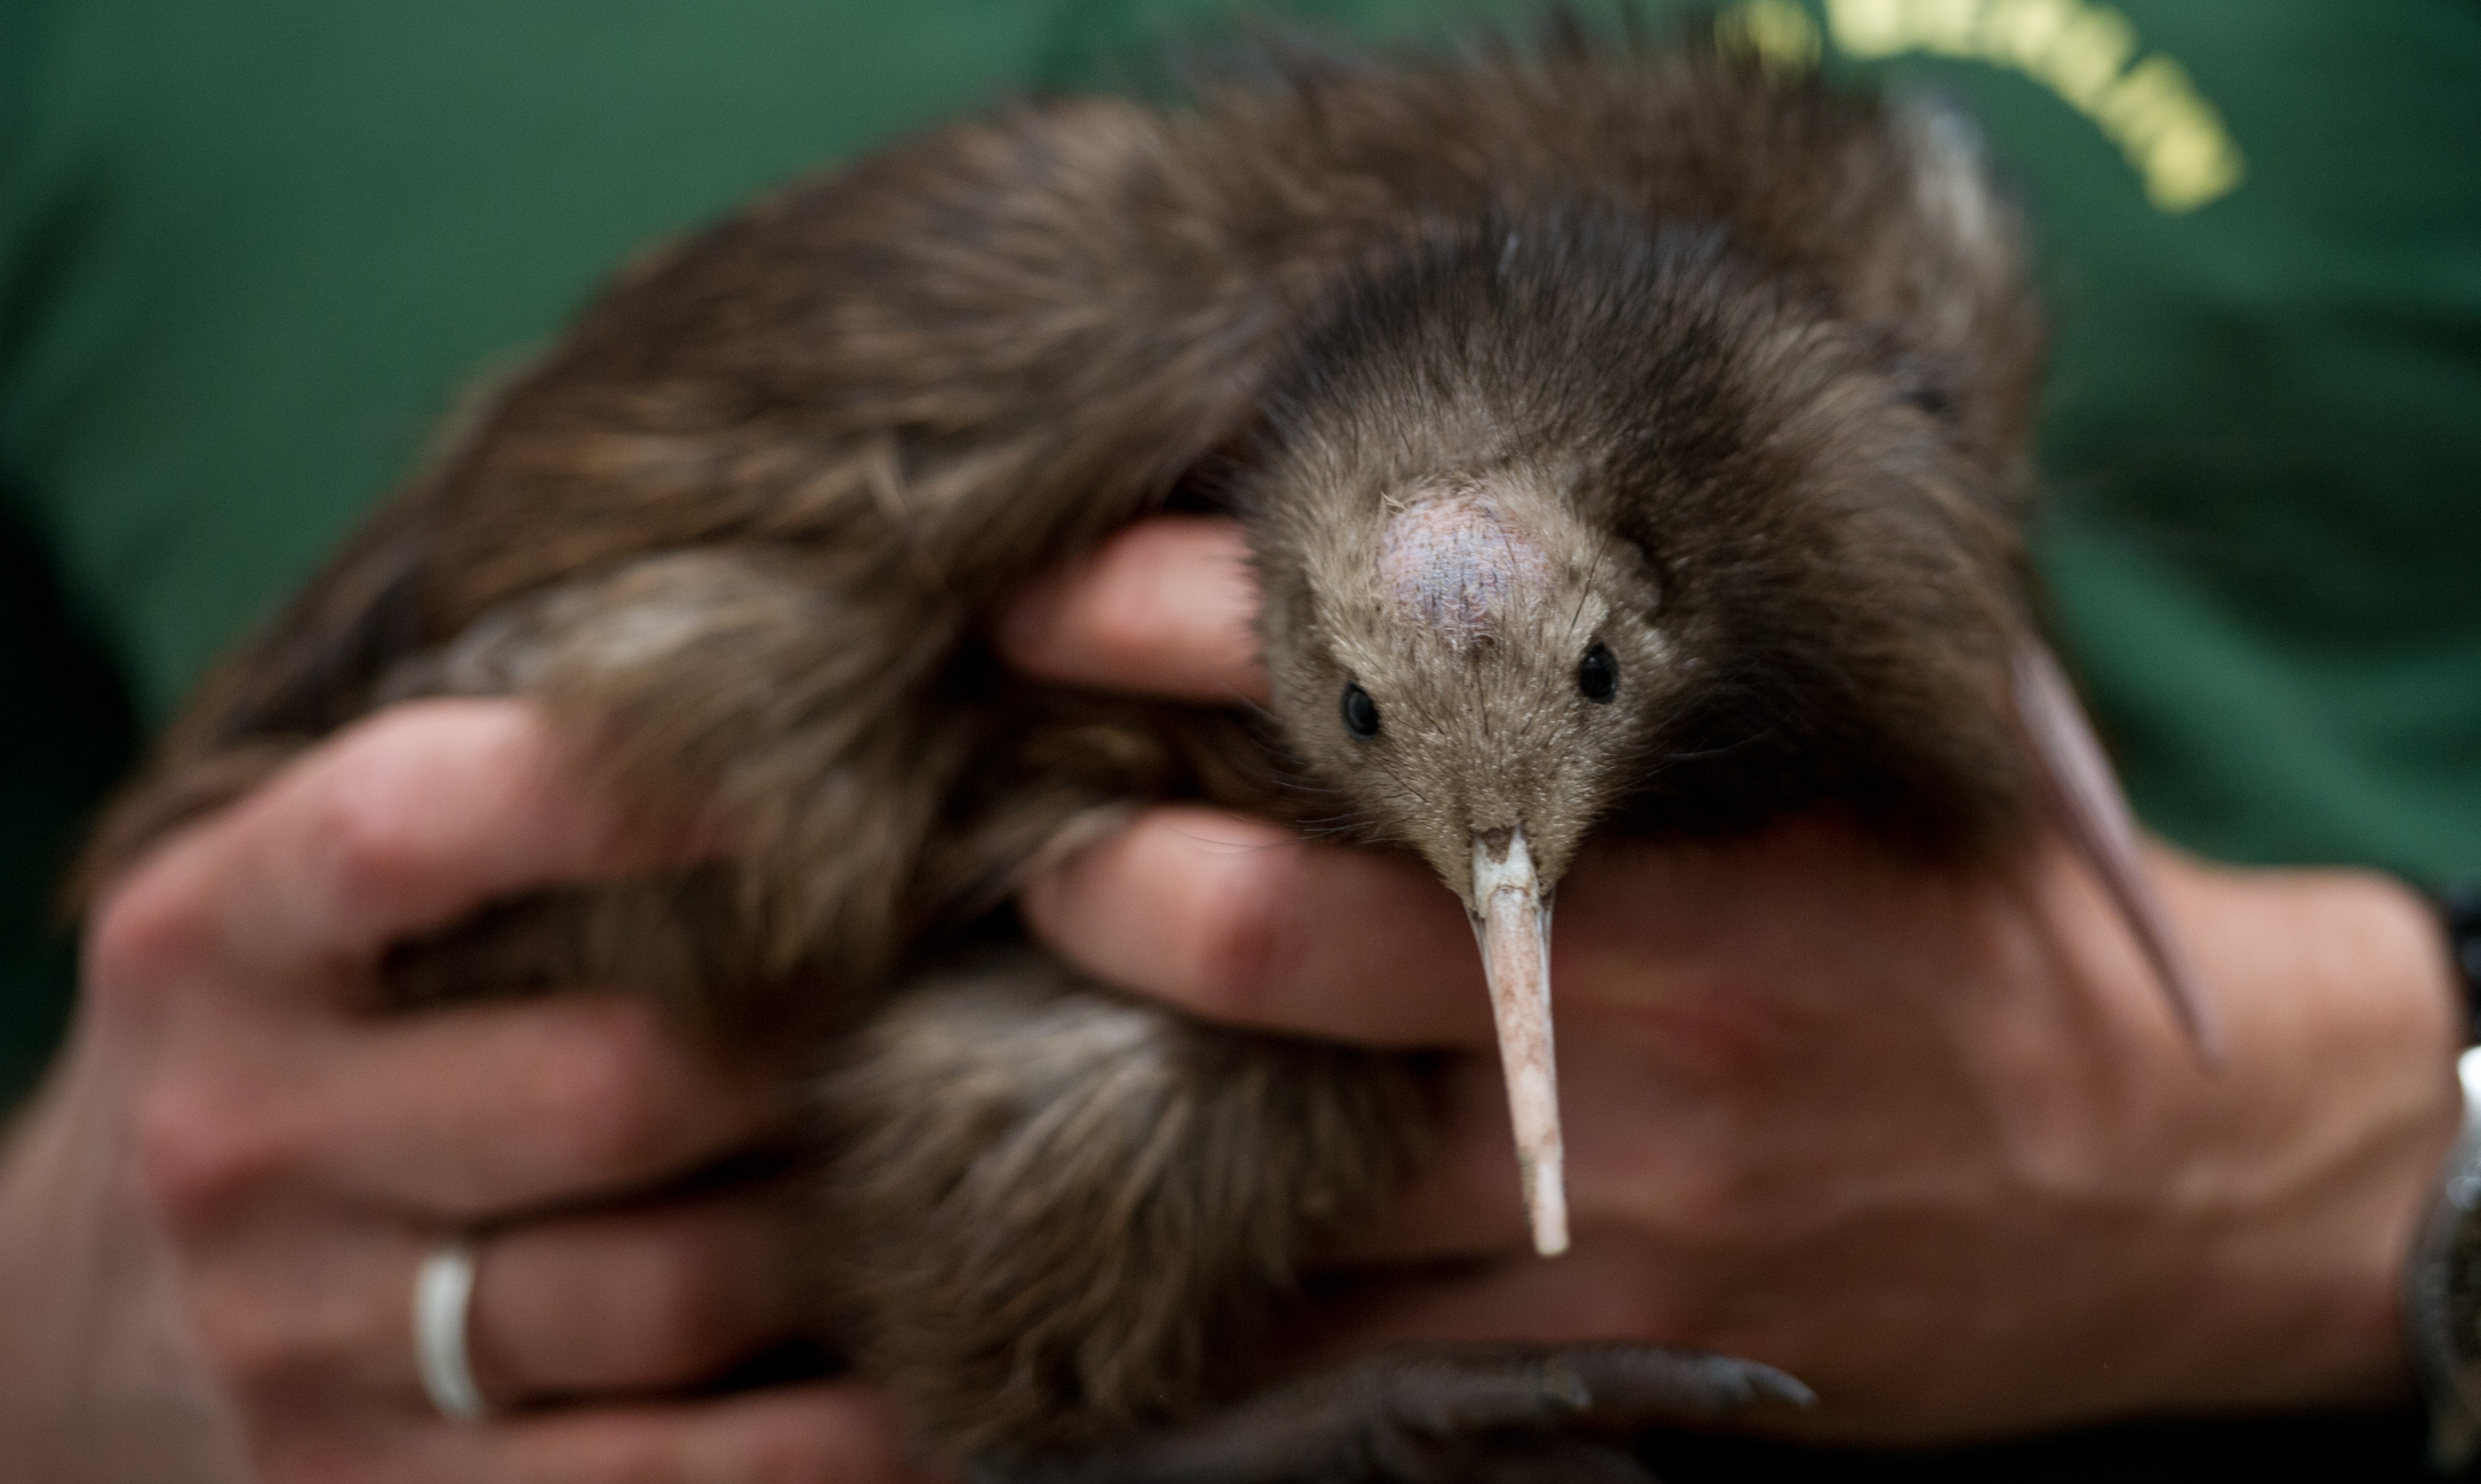 New Zealand Kiwi Is Not From Australia, Scientists Find | Time